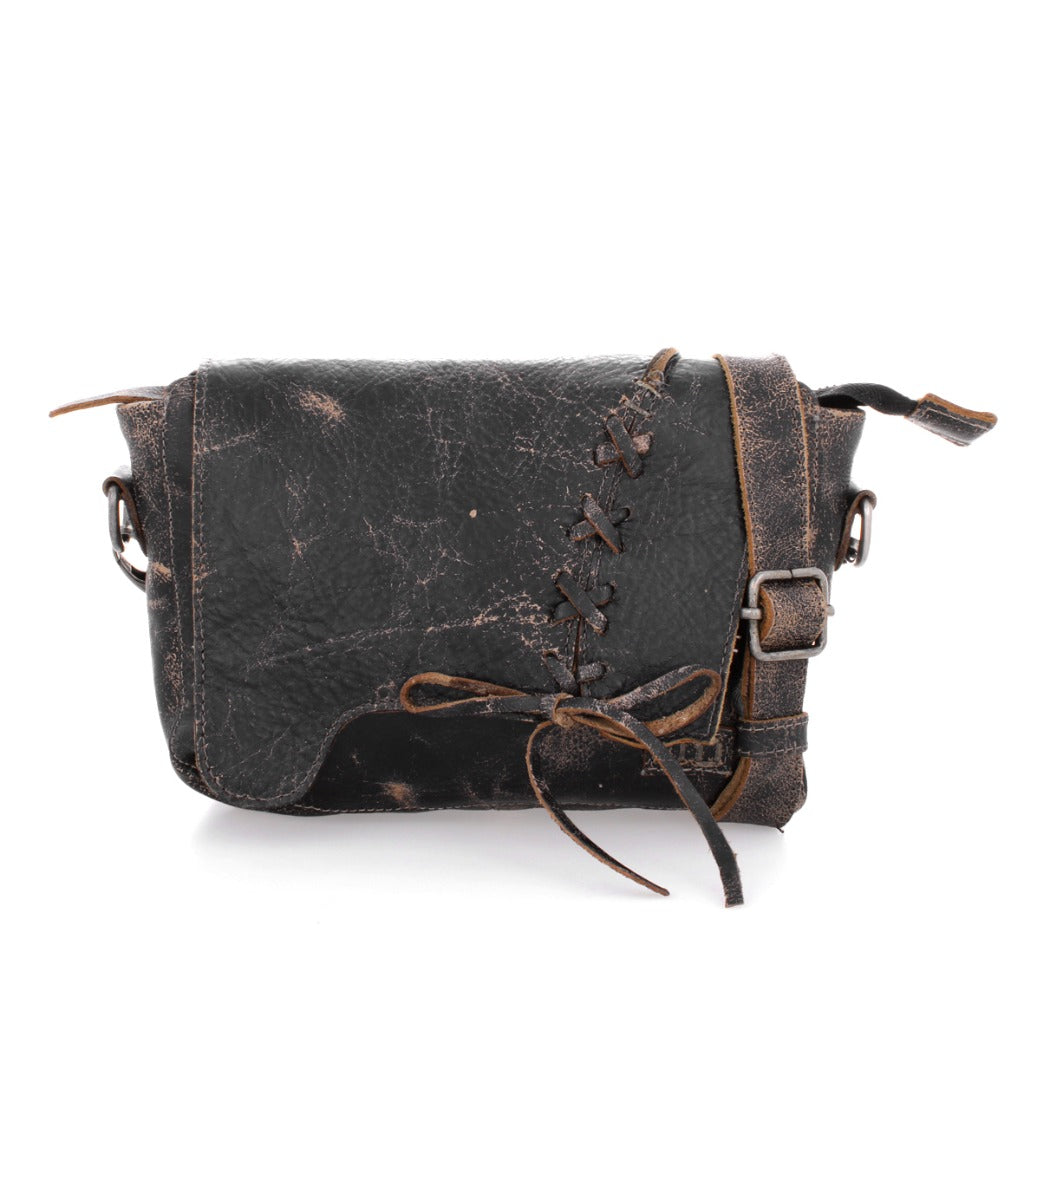 A black leather Buffy crossbody bag with a Bed Stu leather strap.